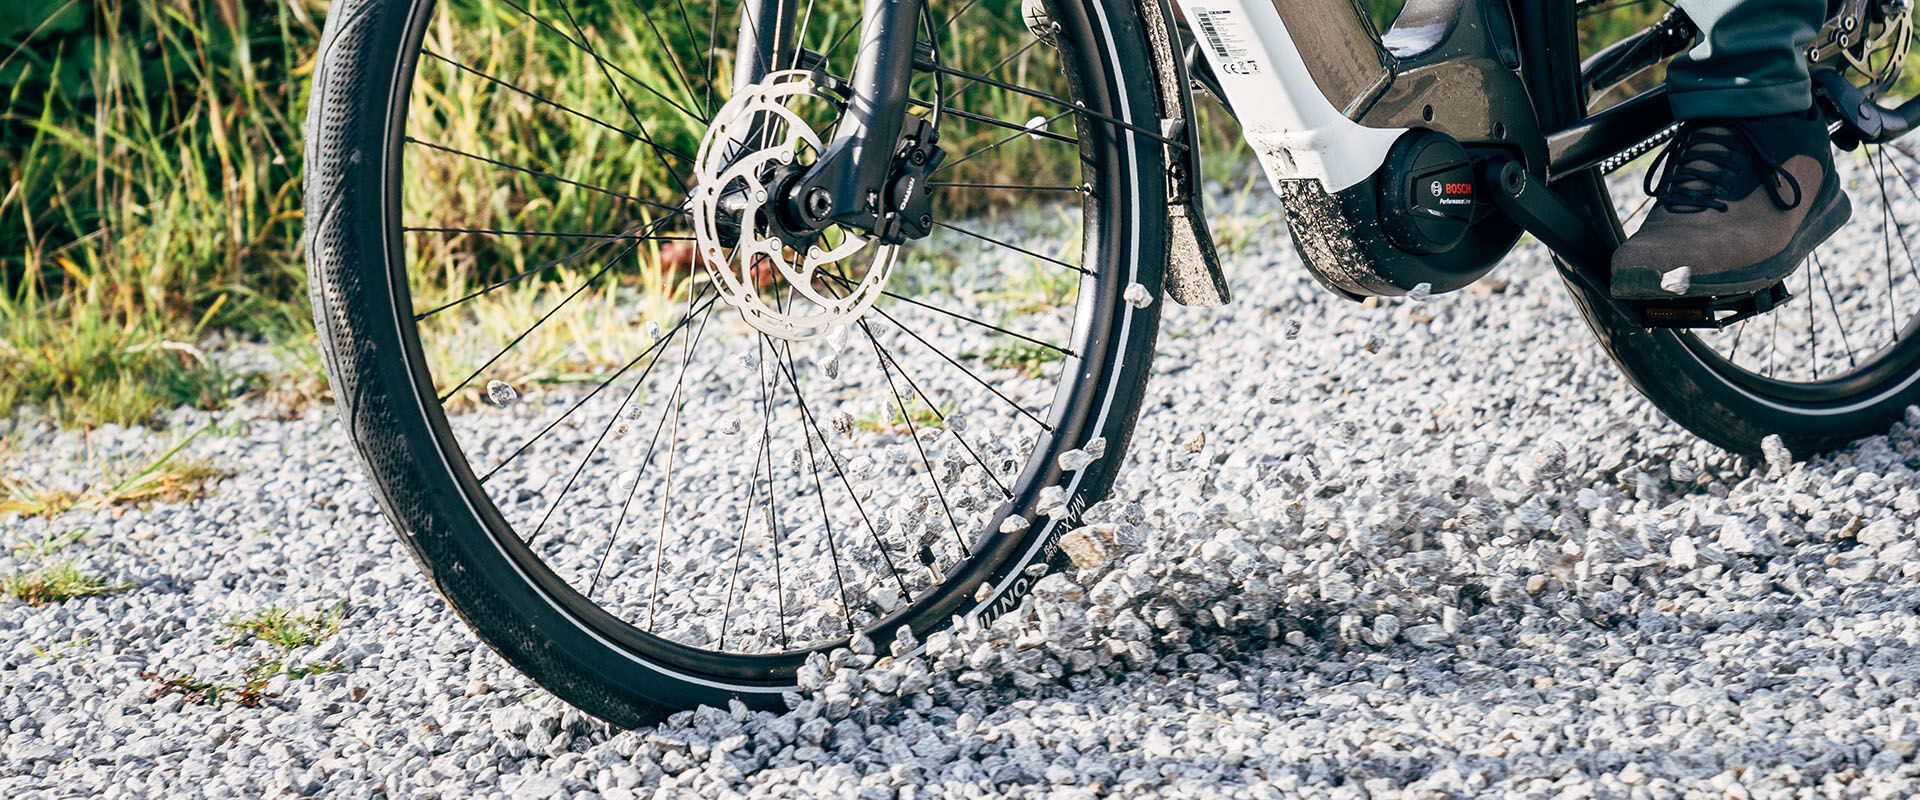 Safely and in control - tips for better braking on your e-bike